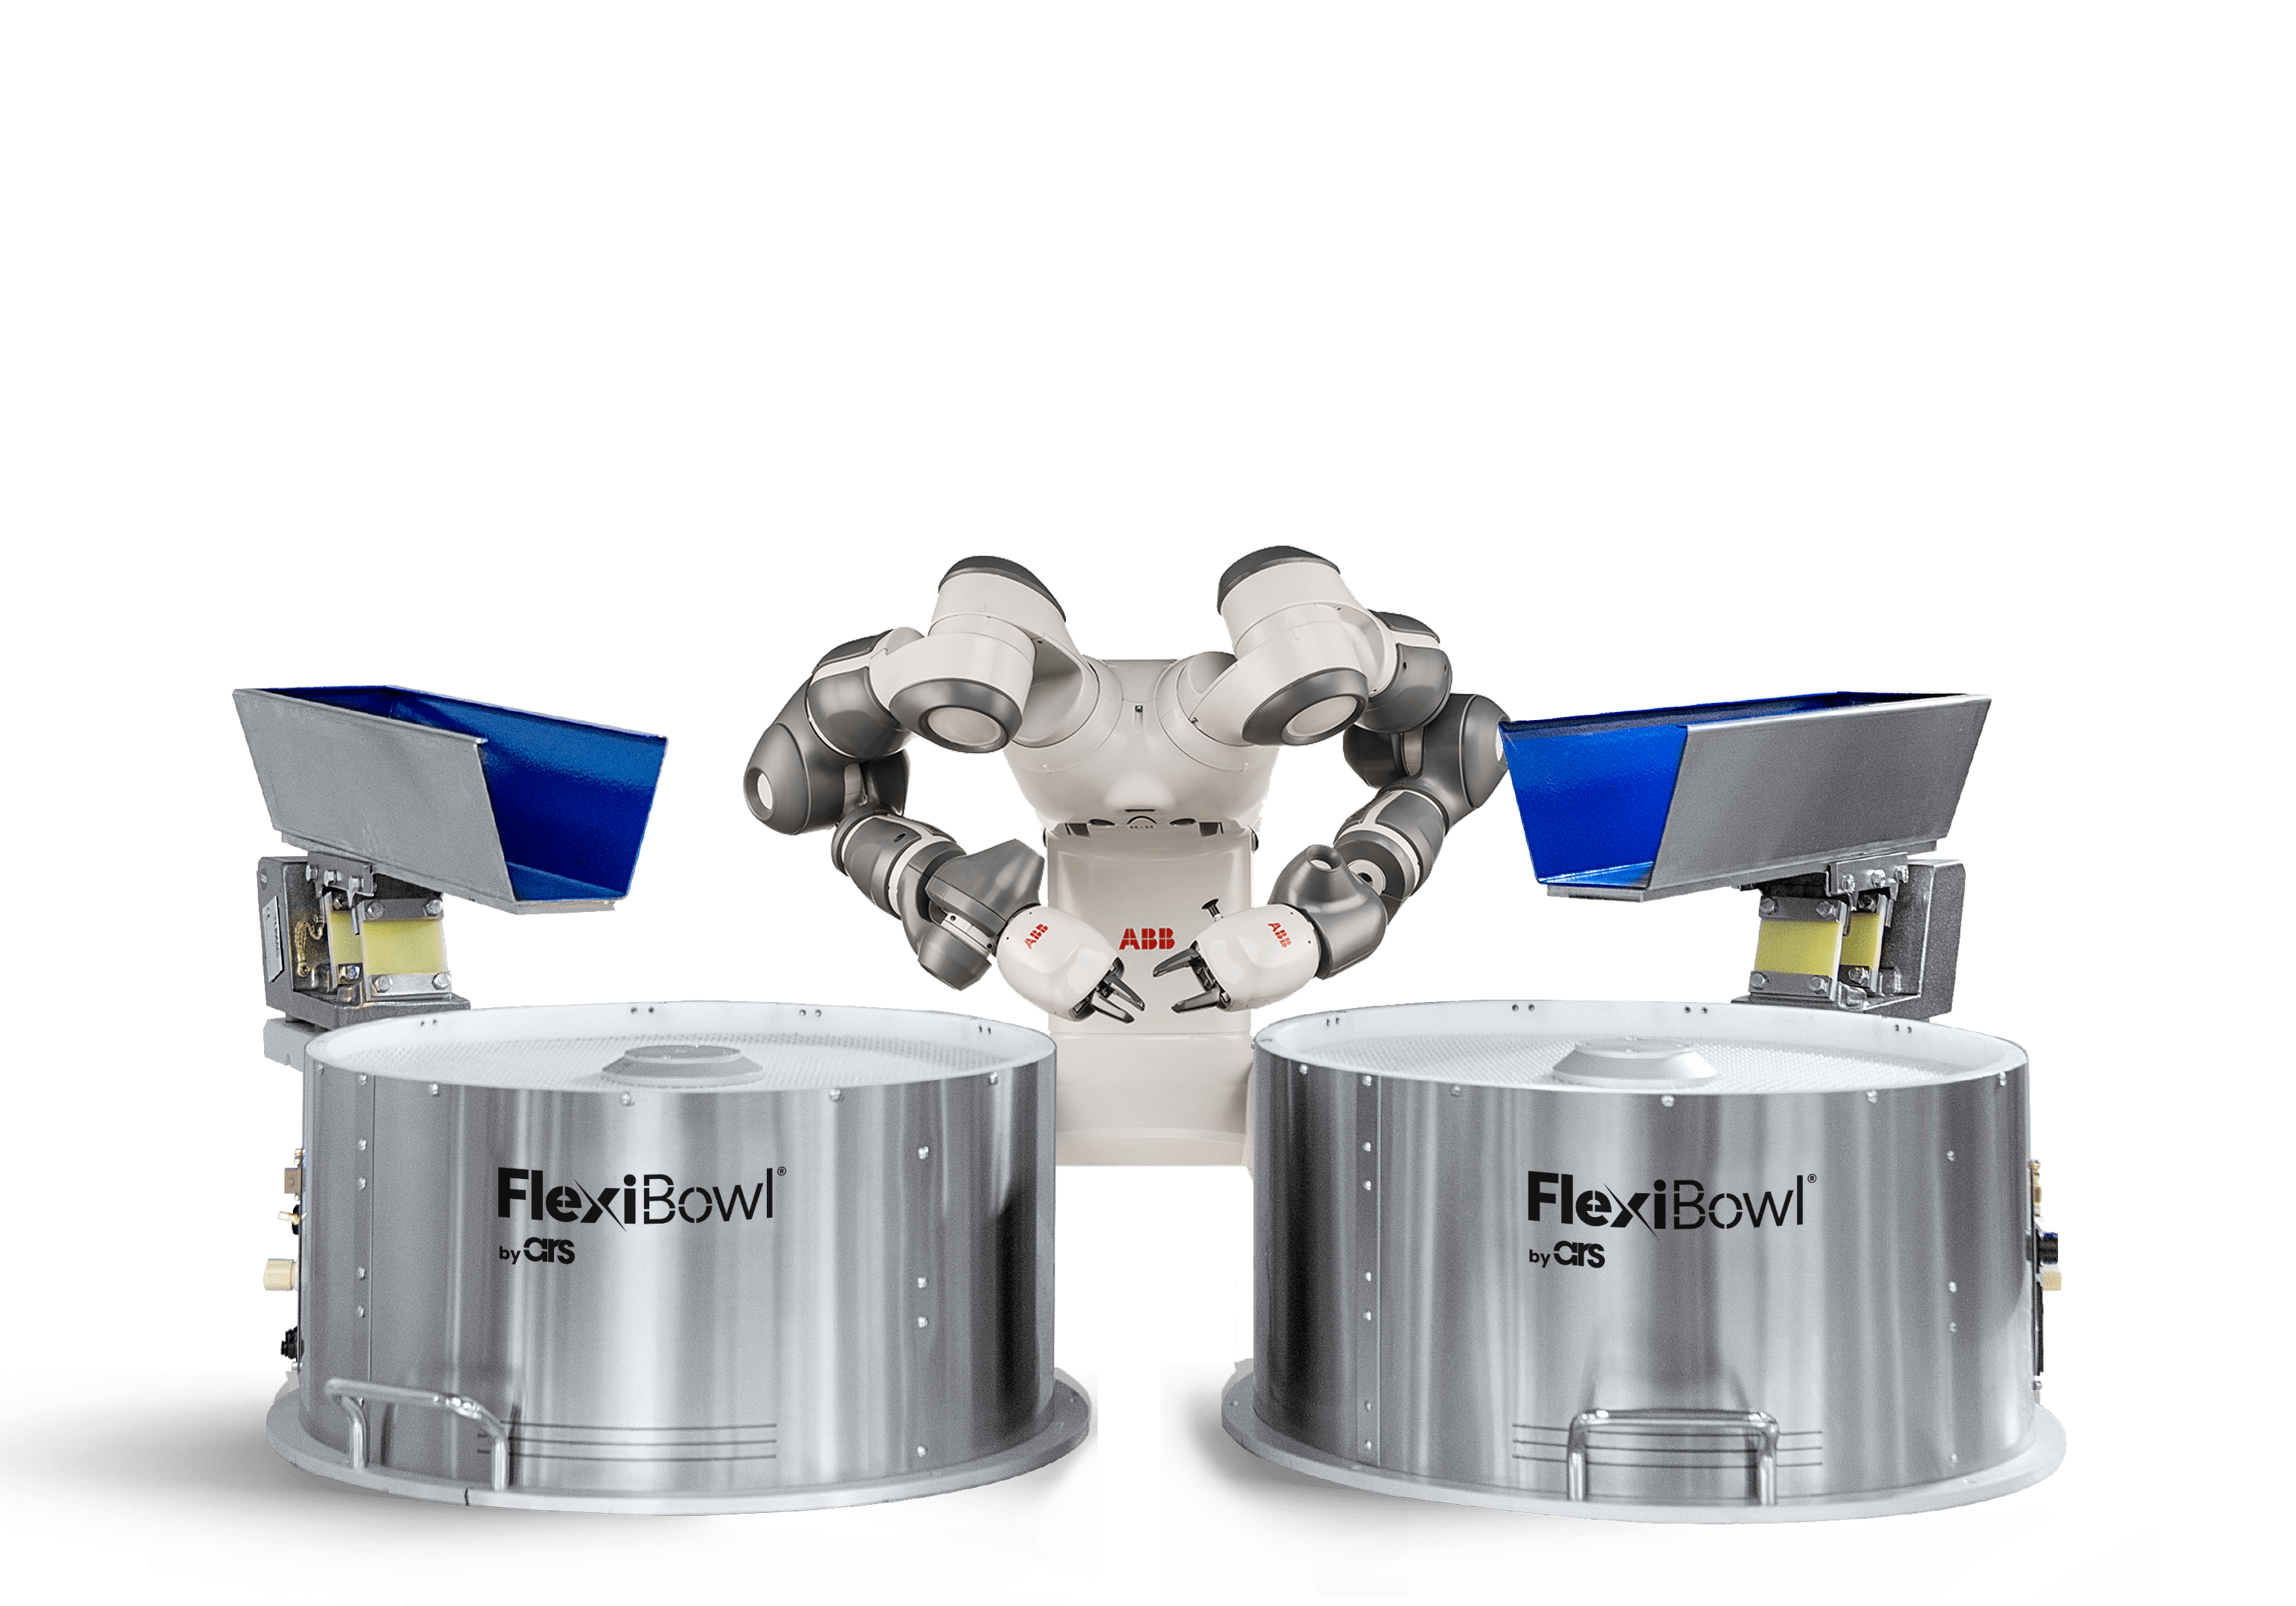 Fleixbowl is Flexibowl is a fully ABB Robots-Compatible Parts Feeding System. Enhancing Pick and Place and Assembly Applications with ABB Robots and FlexiBowl Parts Feeders using Plug-In Technology